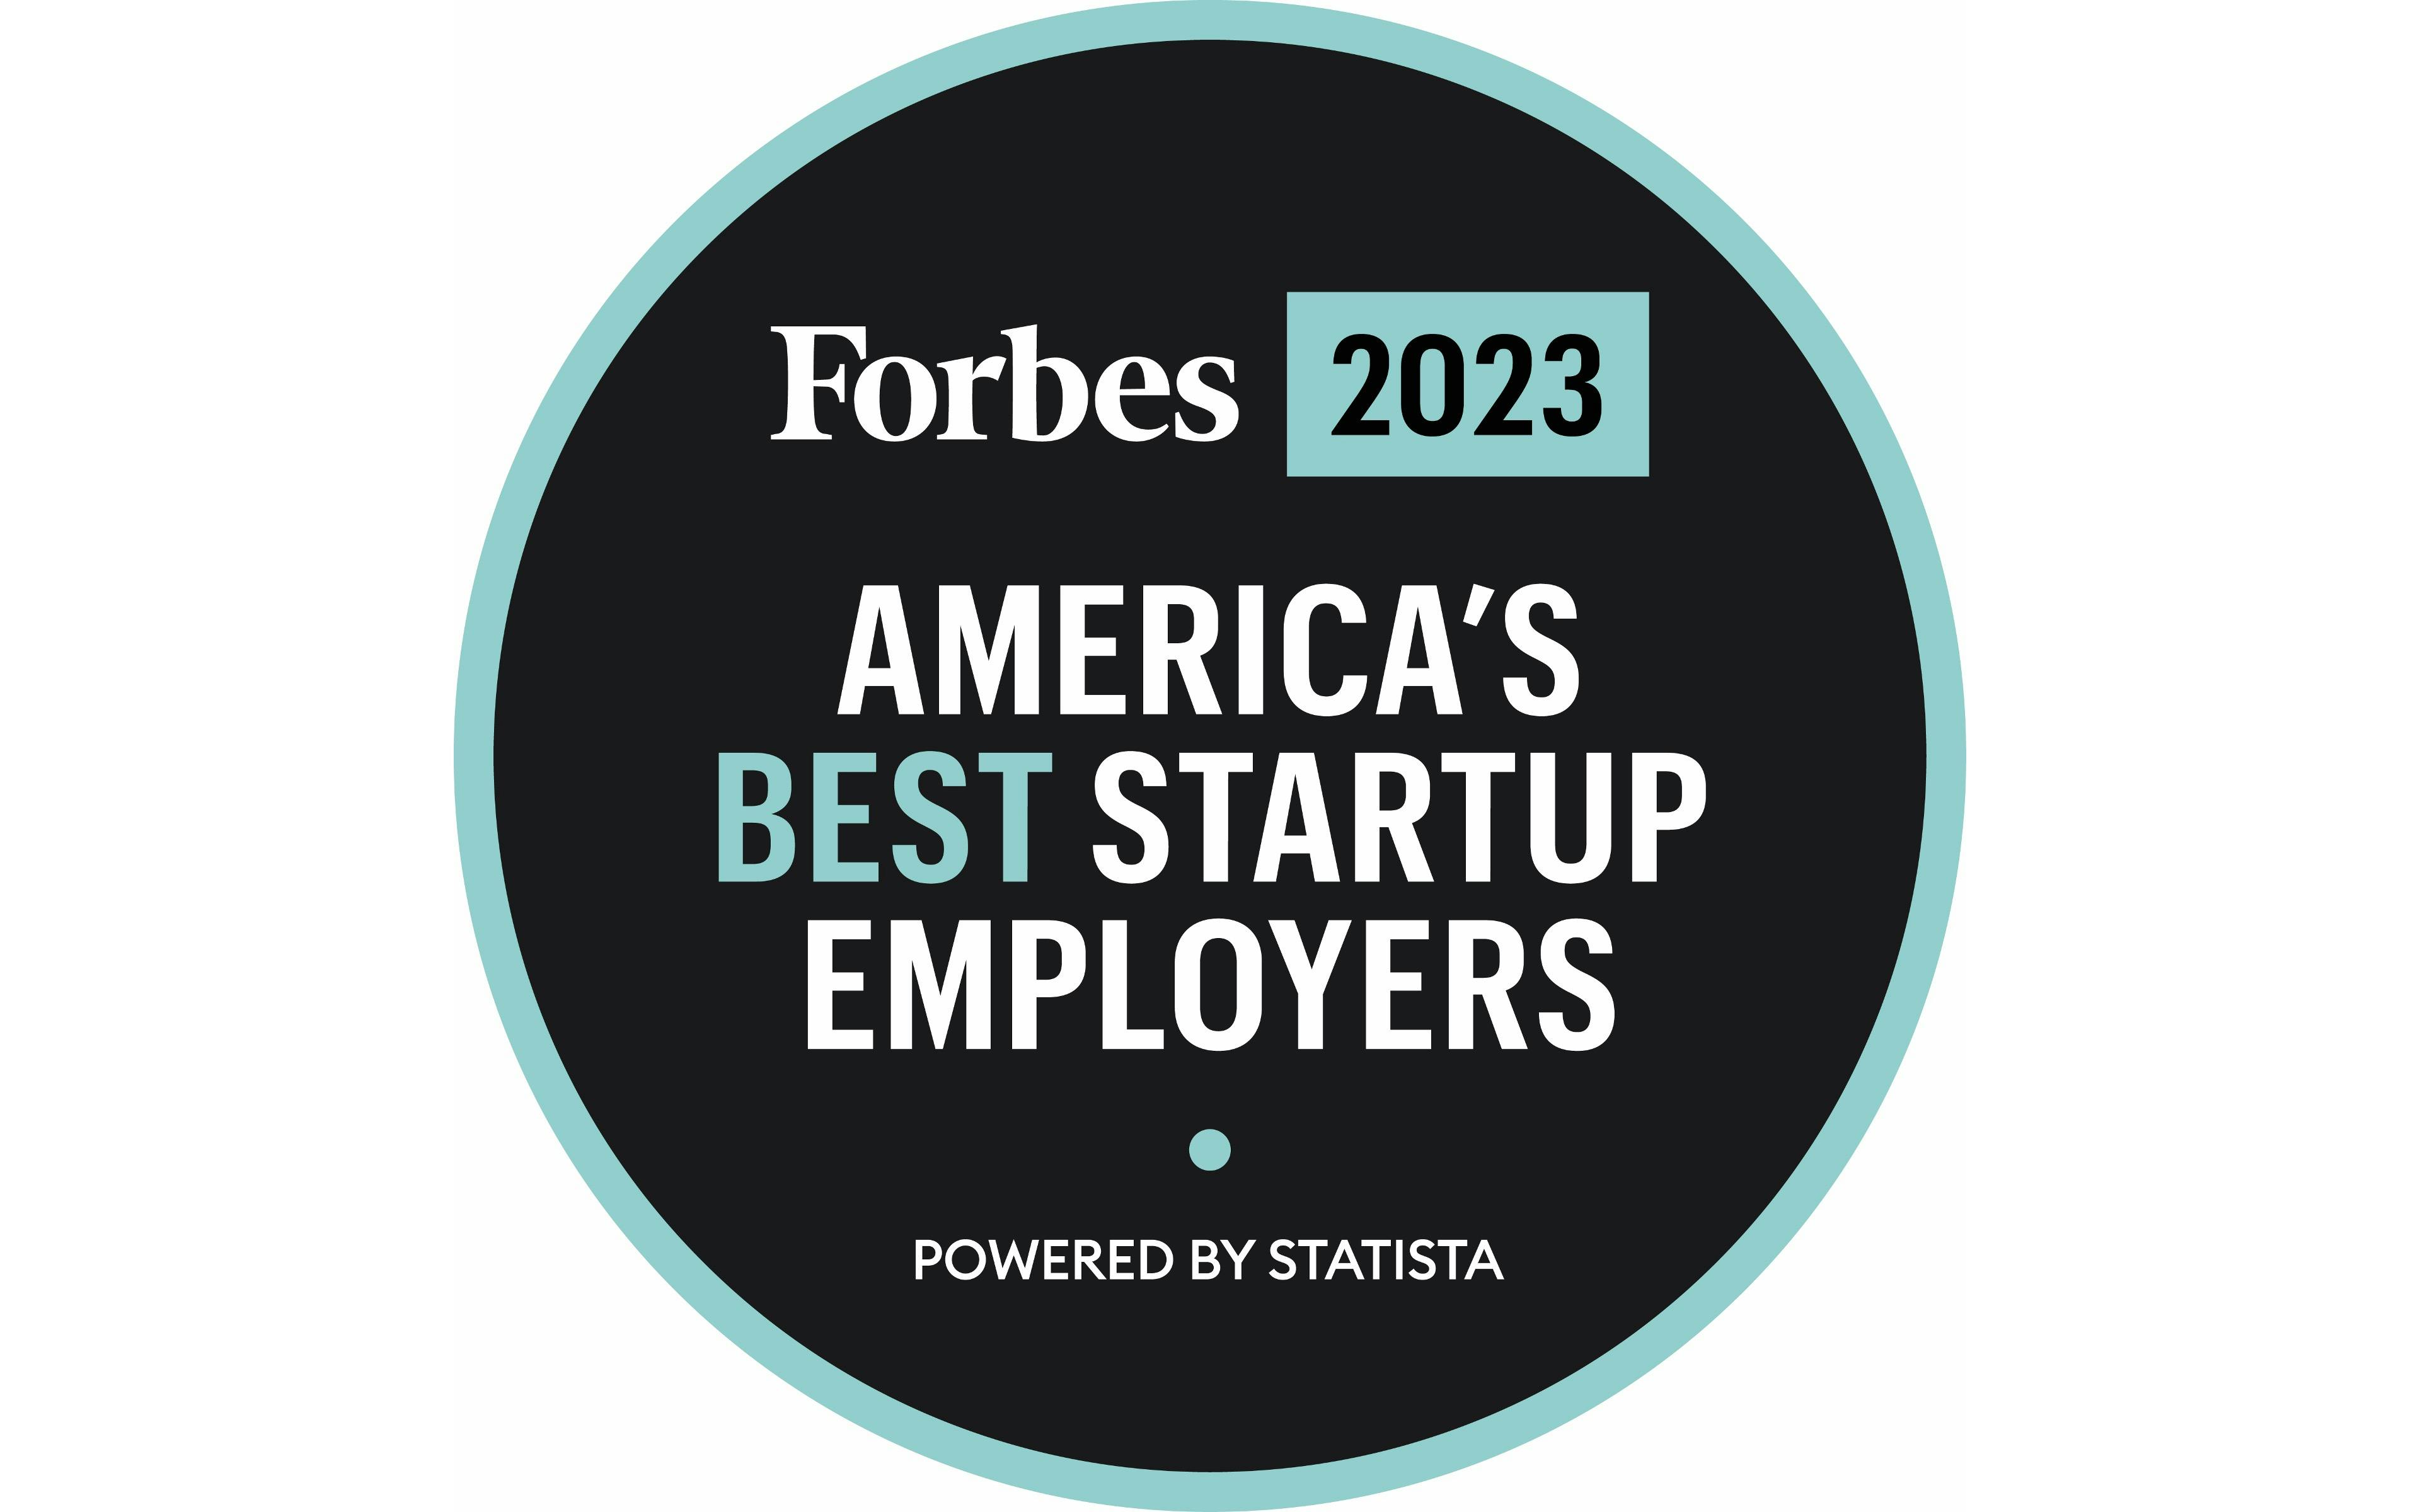 Forbes 2023 America's best startup employers logo